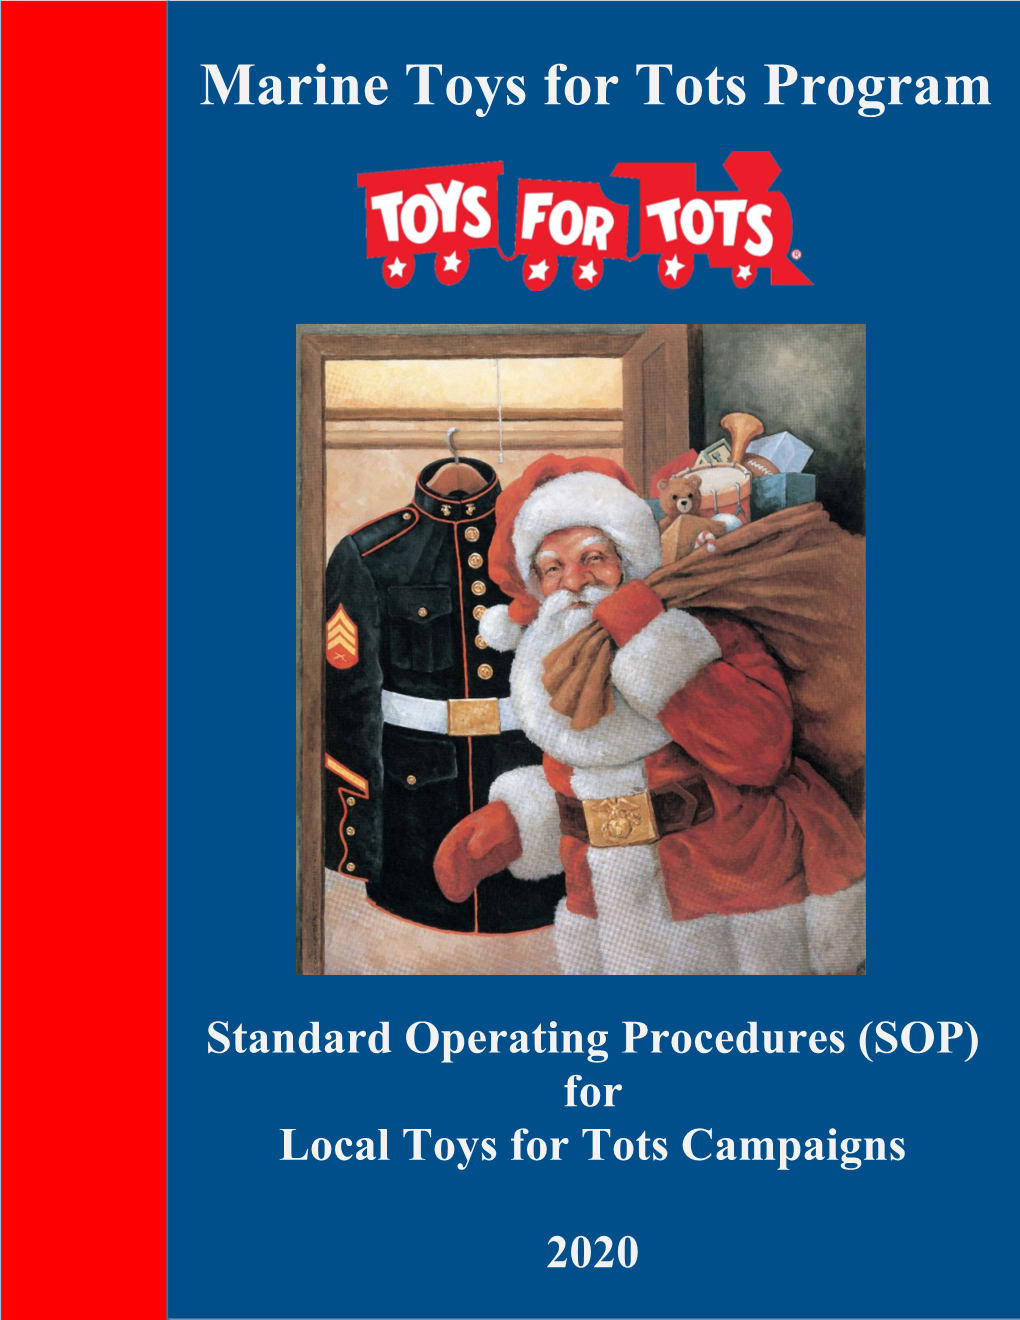 Standard Operating Procedures (SOP) for Local Toys for Tots Campaigns